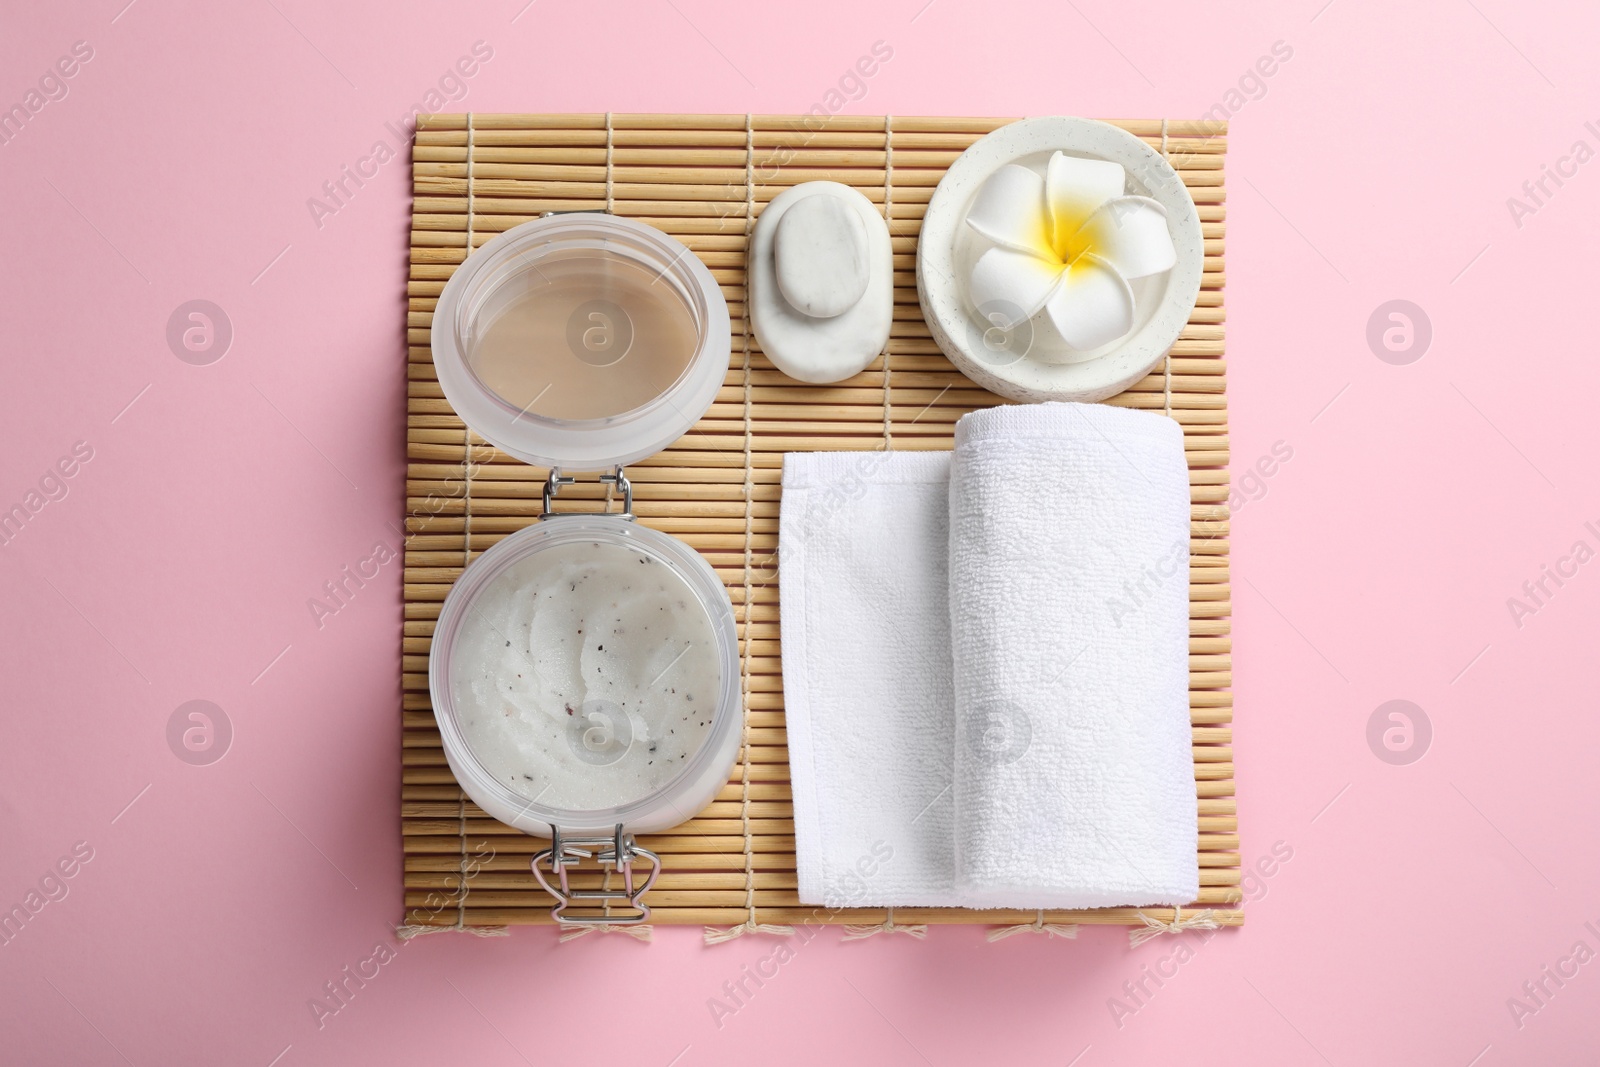 Photo of Body scrub, towel, spa stones and plumeria flower on pink background, top view